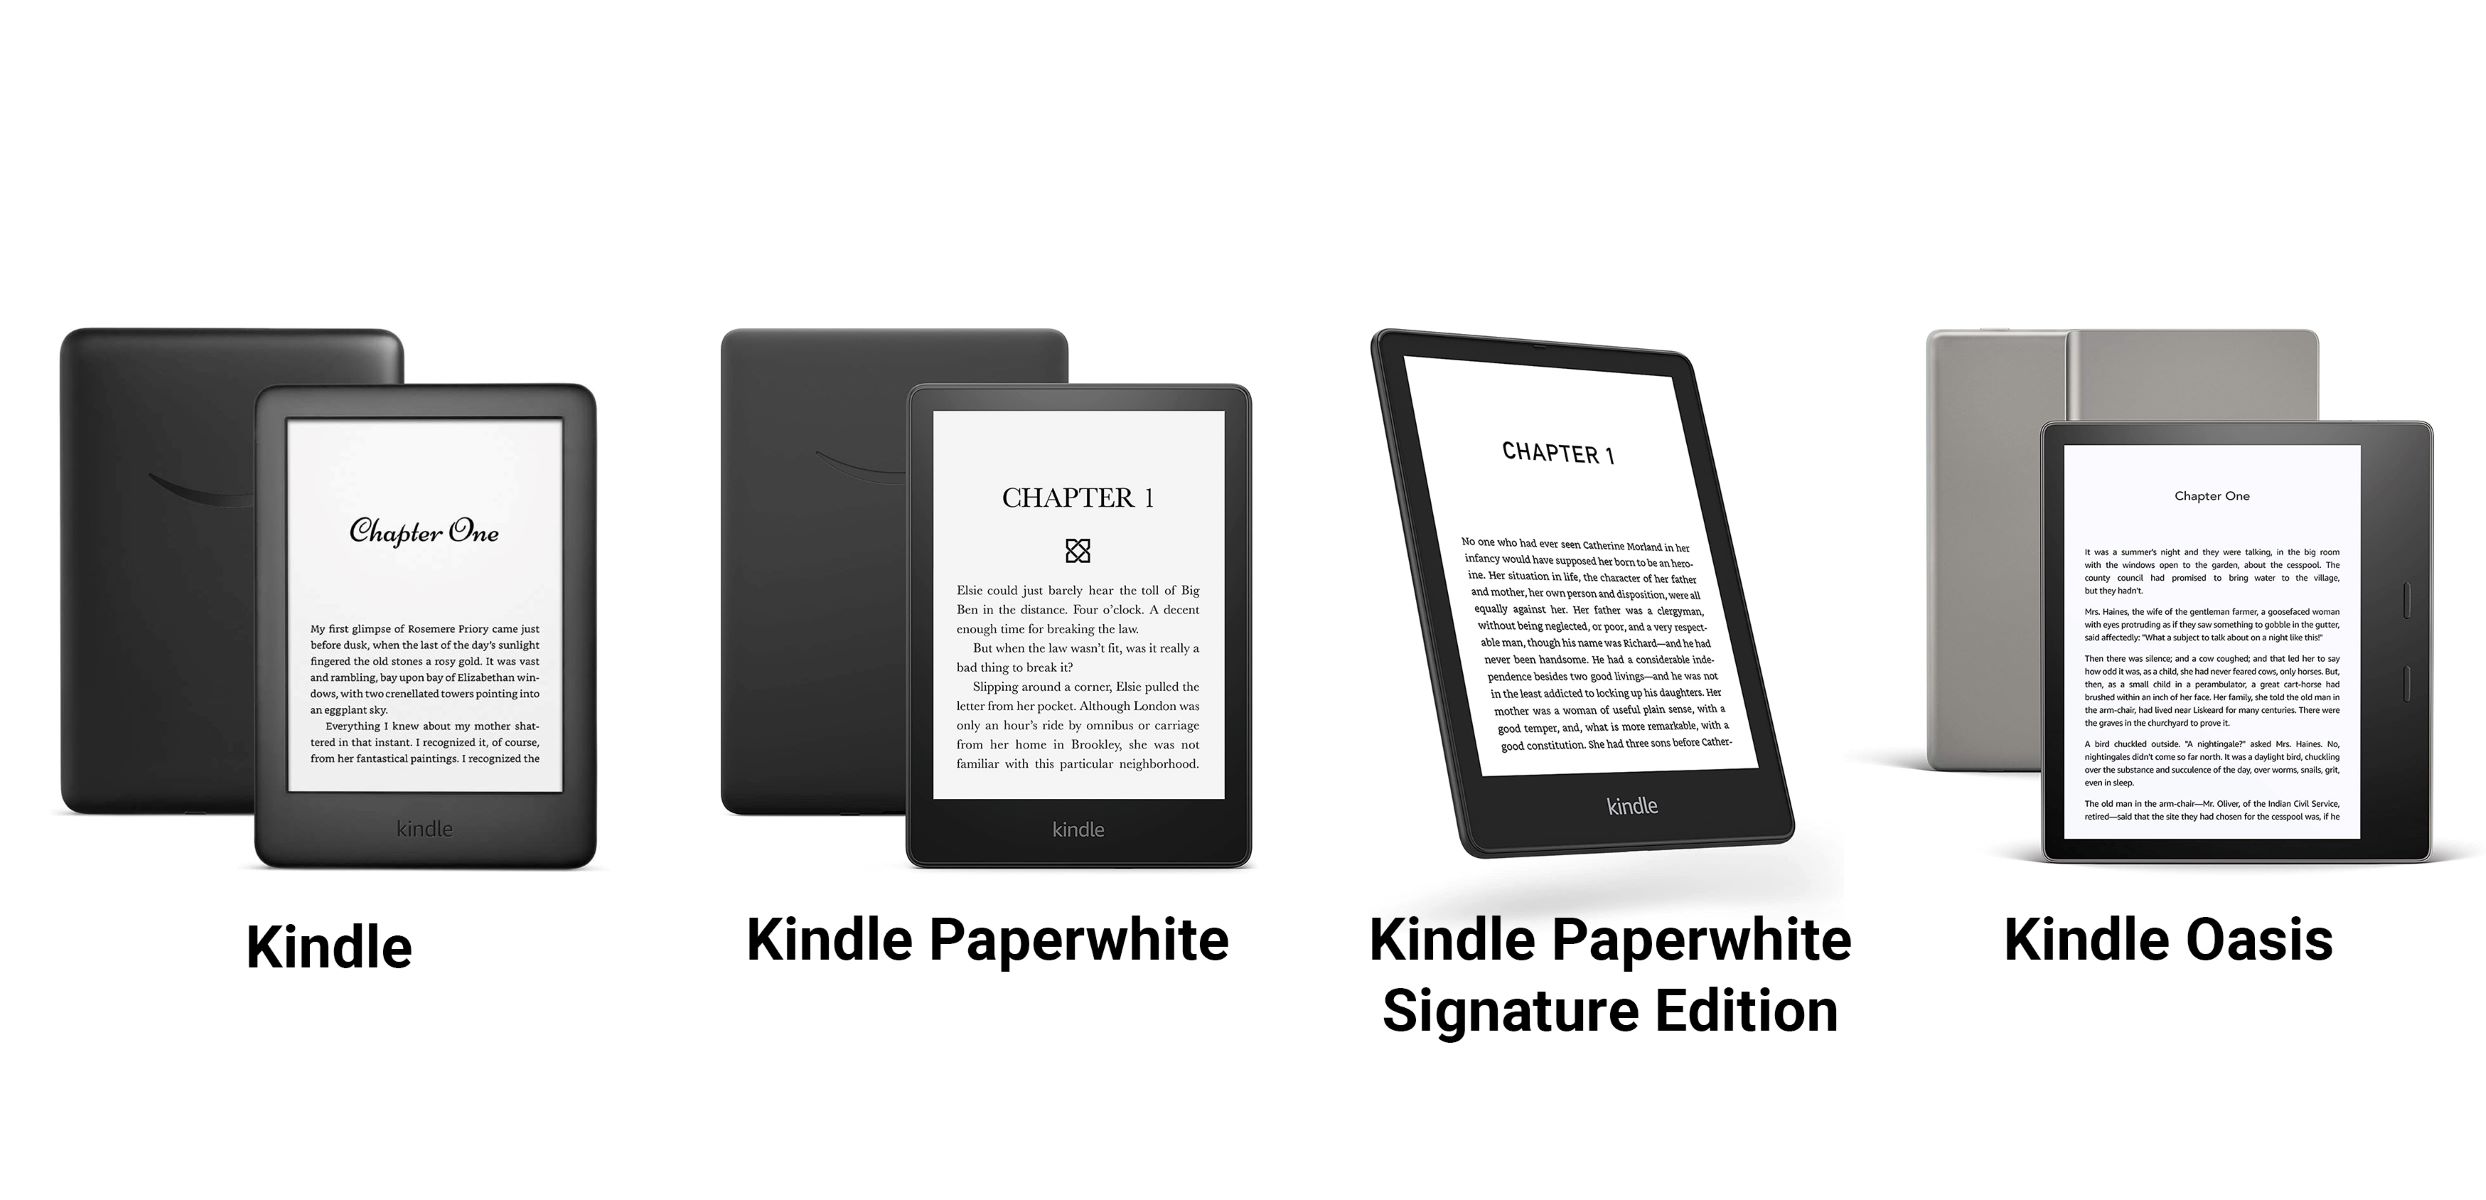 how-do-i-know-which-kindle-fire-i-have